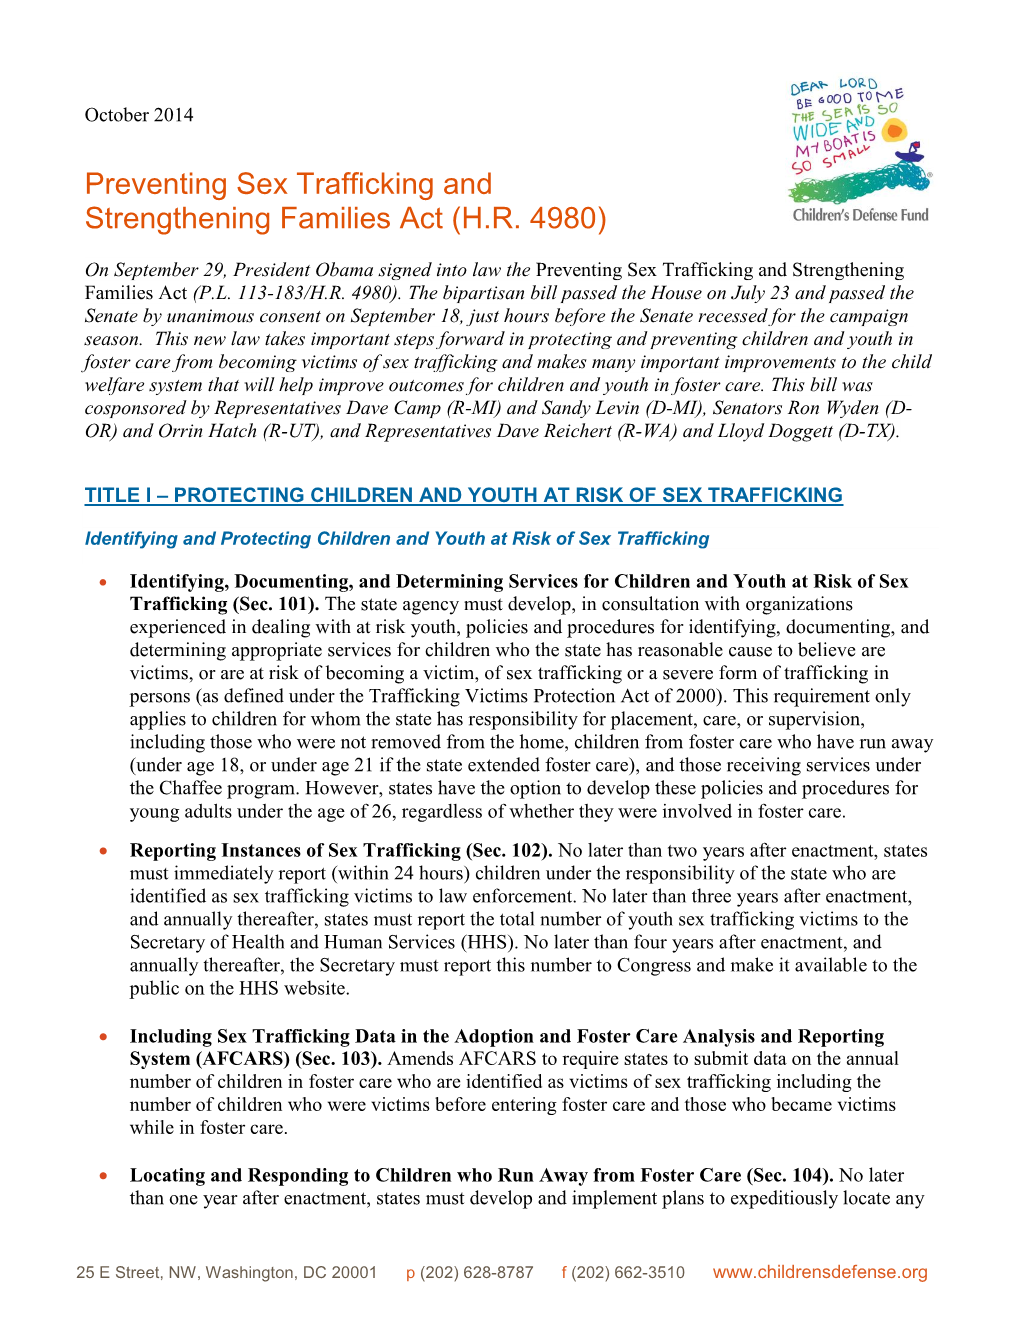 Preventing Sex Trafficking and Strengthening Families Act (H.R. 4980)